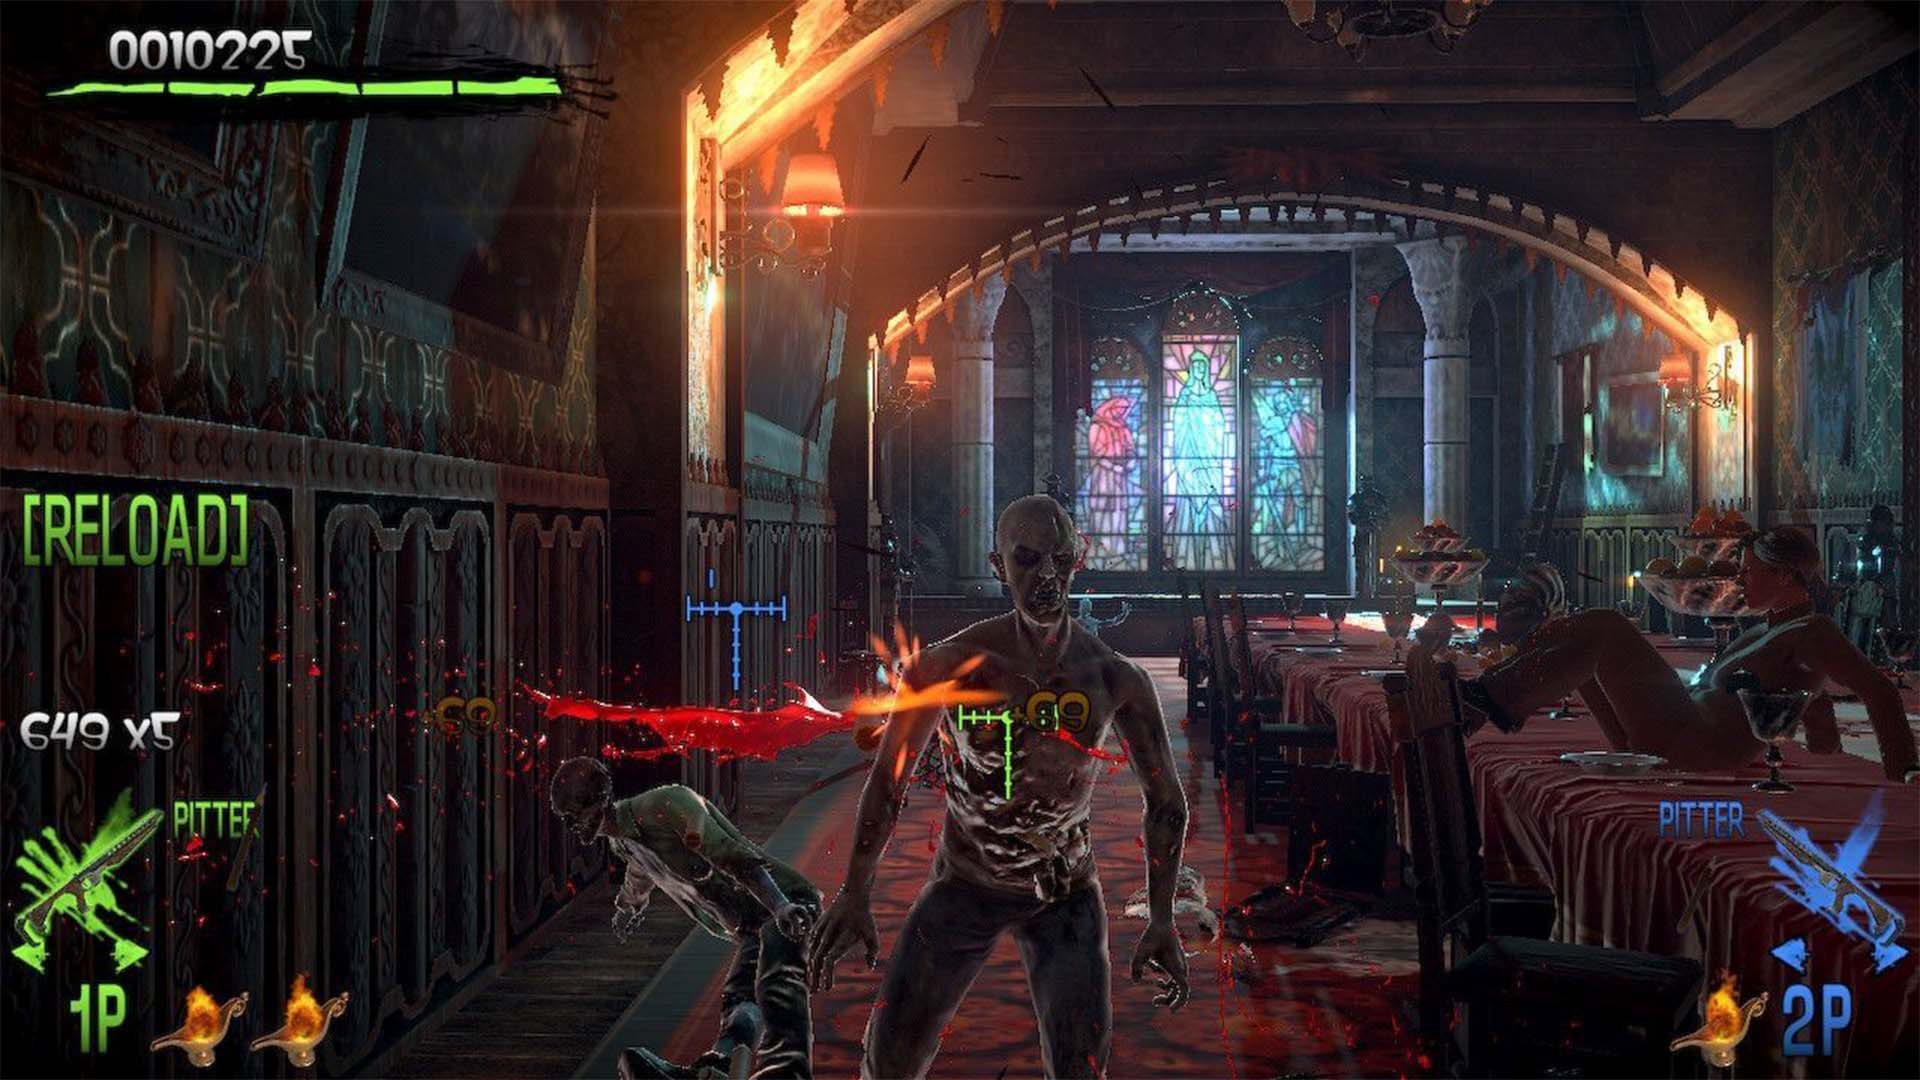 The House of the Dead: Remake review